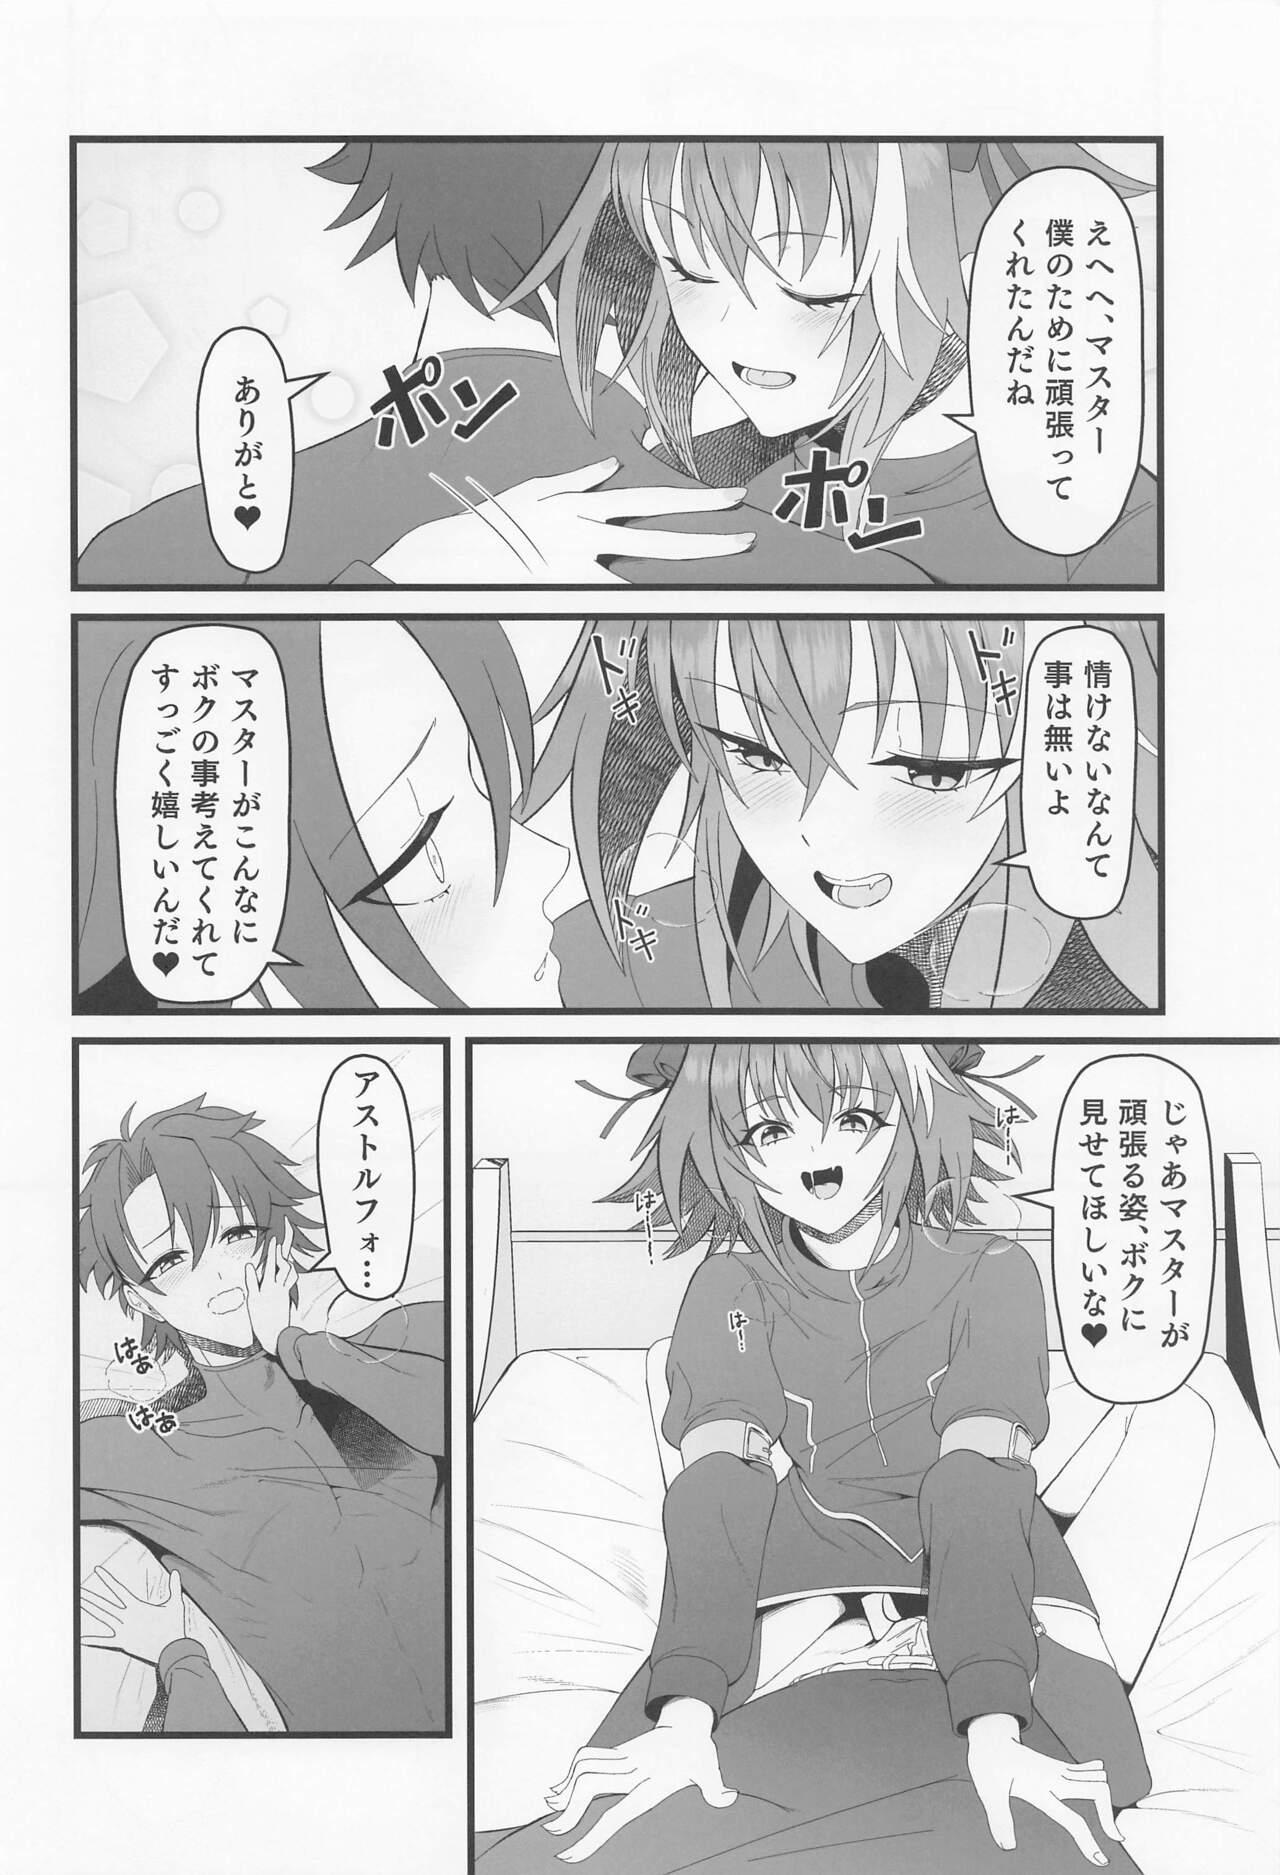 Sexo Kimi no Ichiban ni Naritakute - I wanted to be your number one. - Fate grand order Webcamsex - Page 9